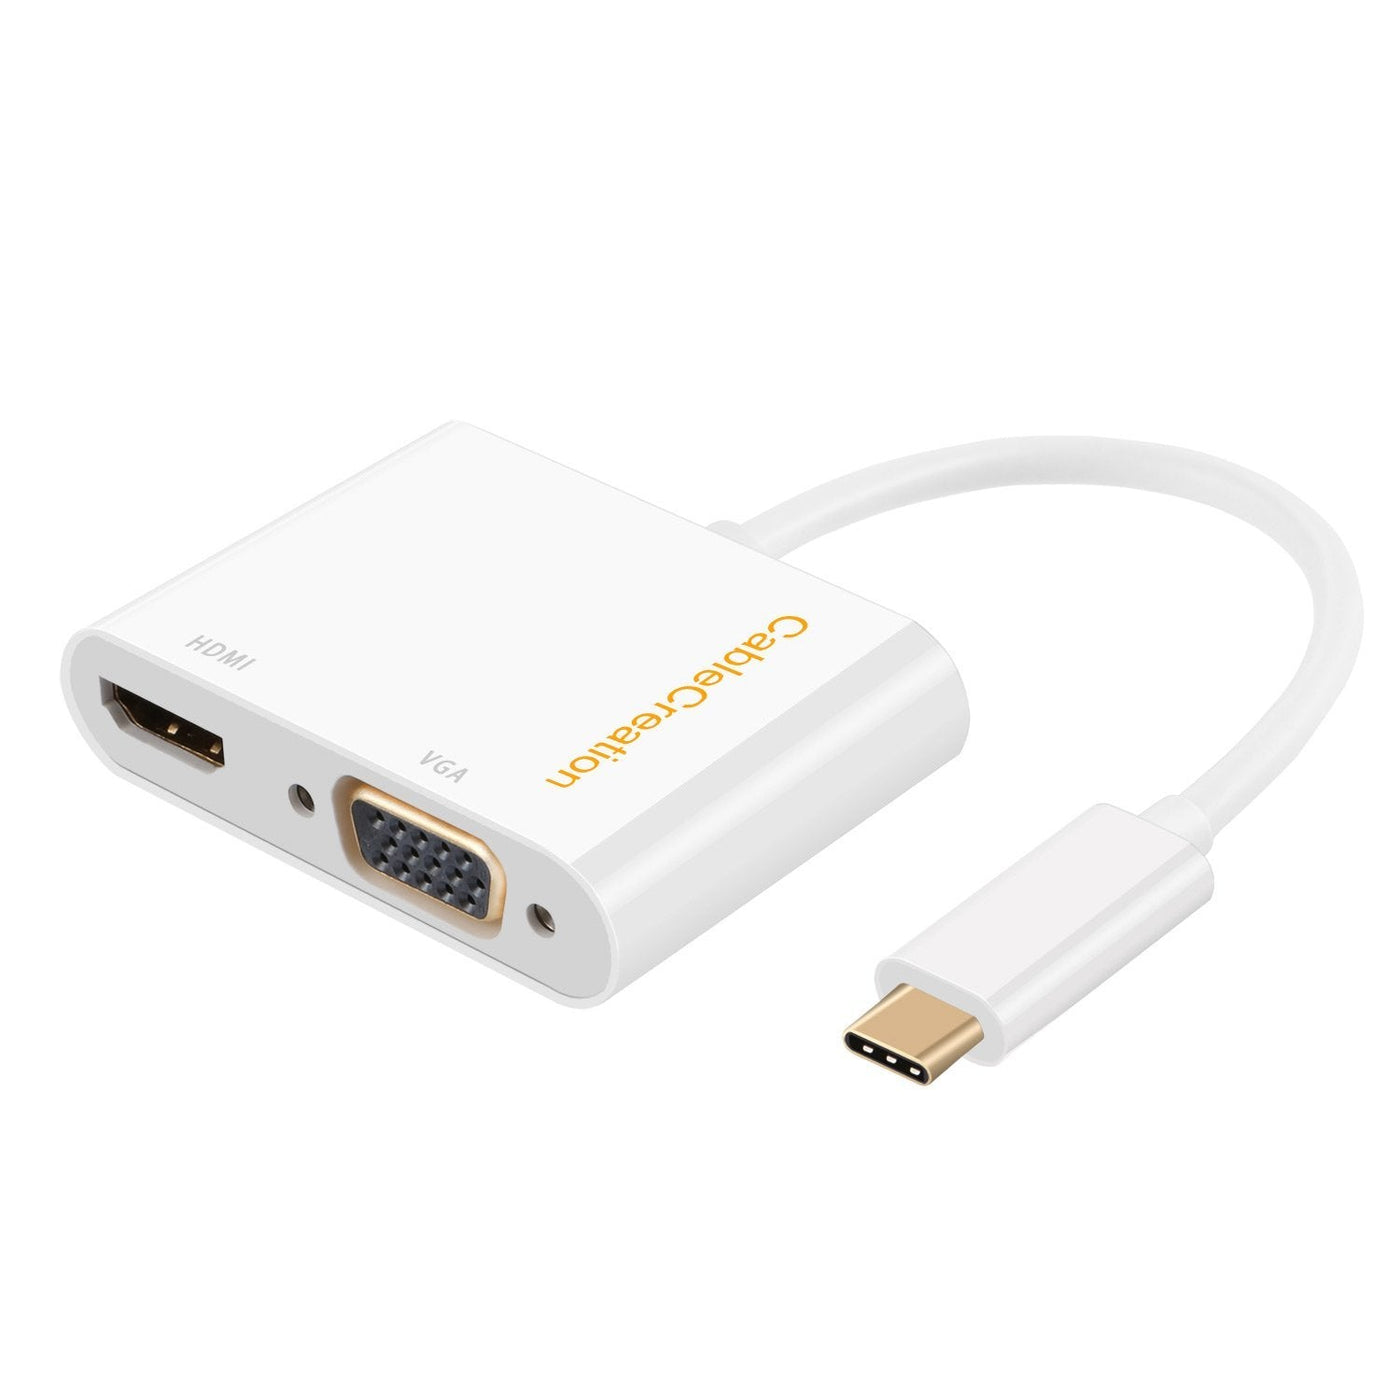 CableCreation USB C to HDMI + VGA adapter, USB 3.1 Type C to VGA HDMI 4K  Splitter, Dual HDMI VGA Hub Plug and Play for Laptop / Cellphone/ Tablet  that Support Thunderbolt 3 